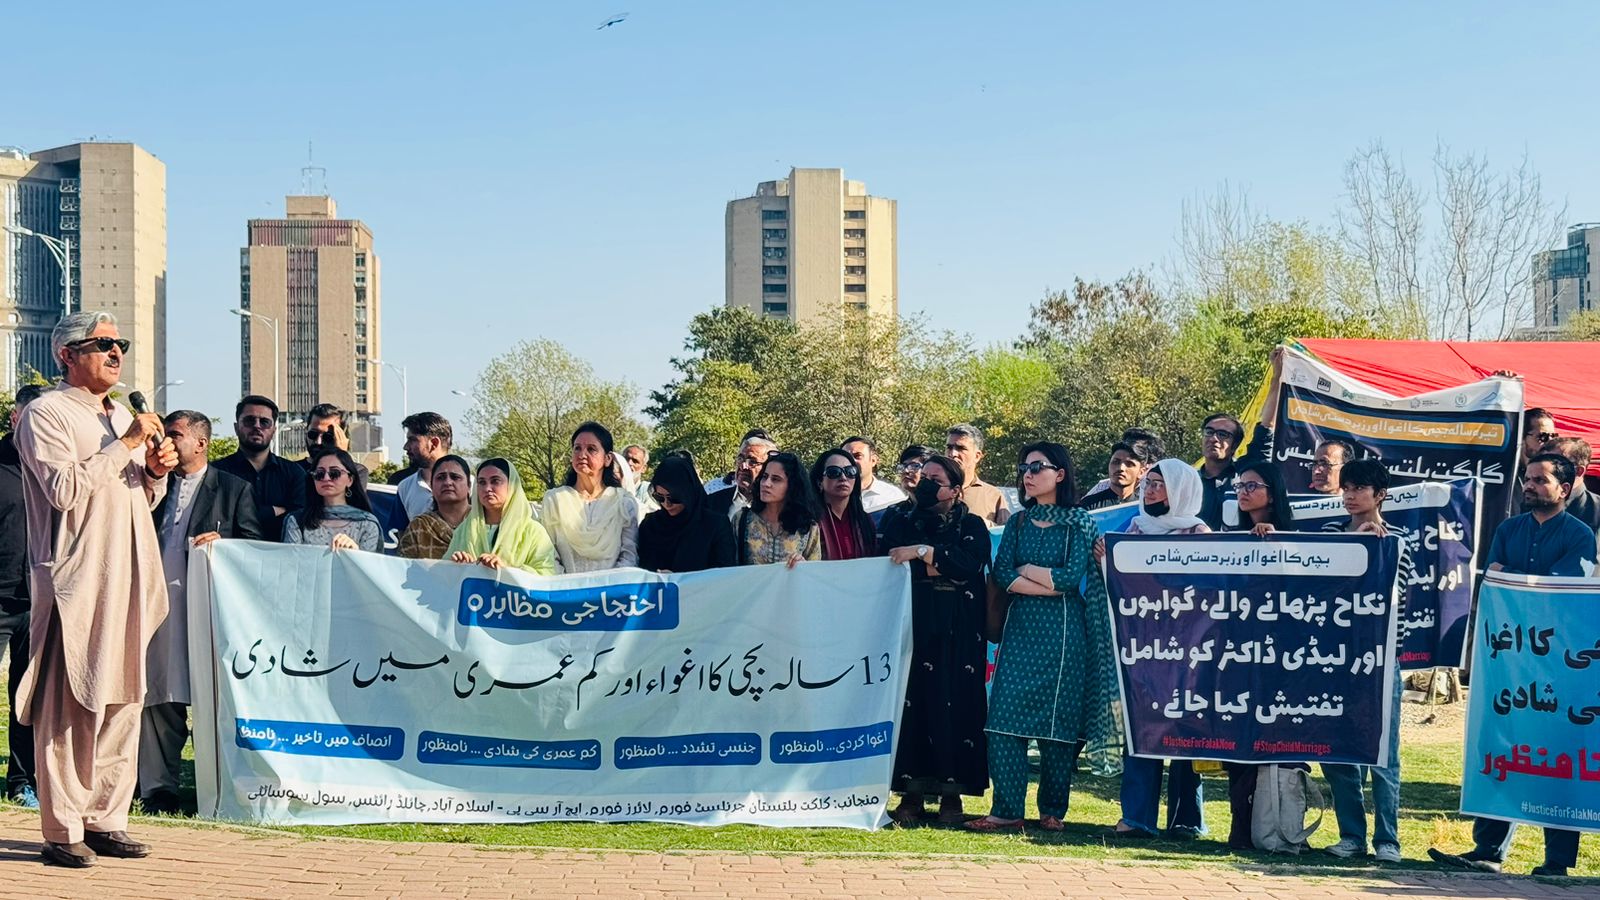 Civil Society Demands Swift Action for Missing Girl at National Press Club Rally